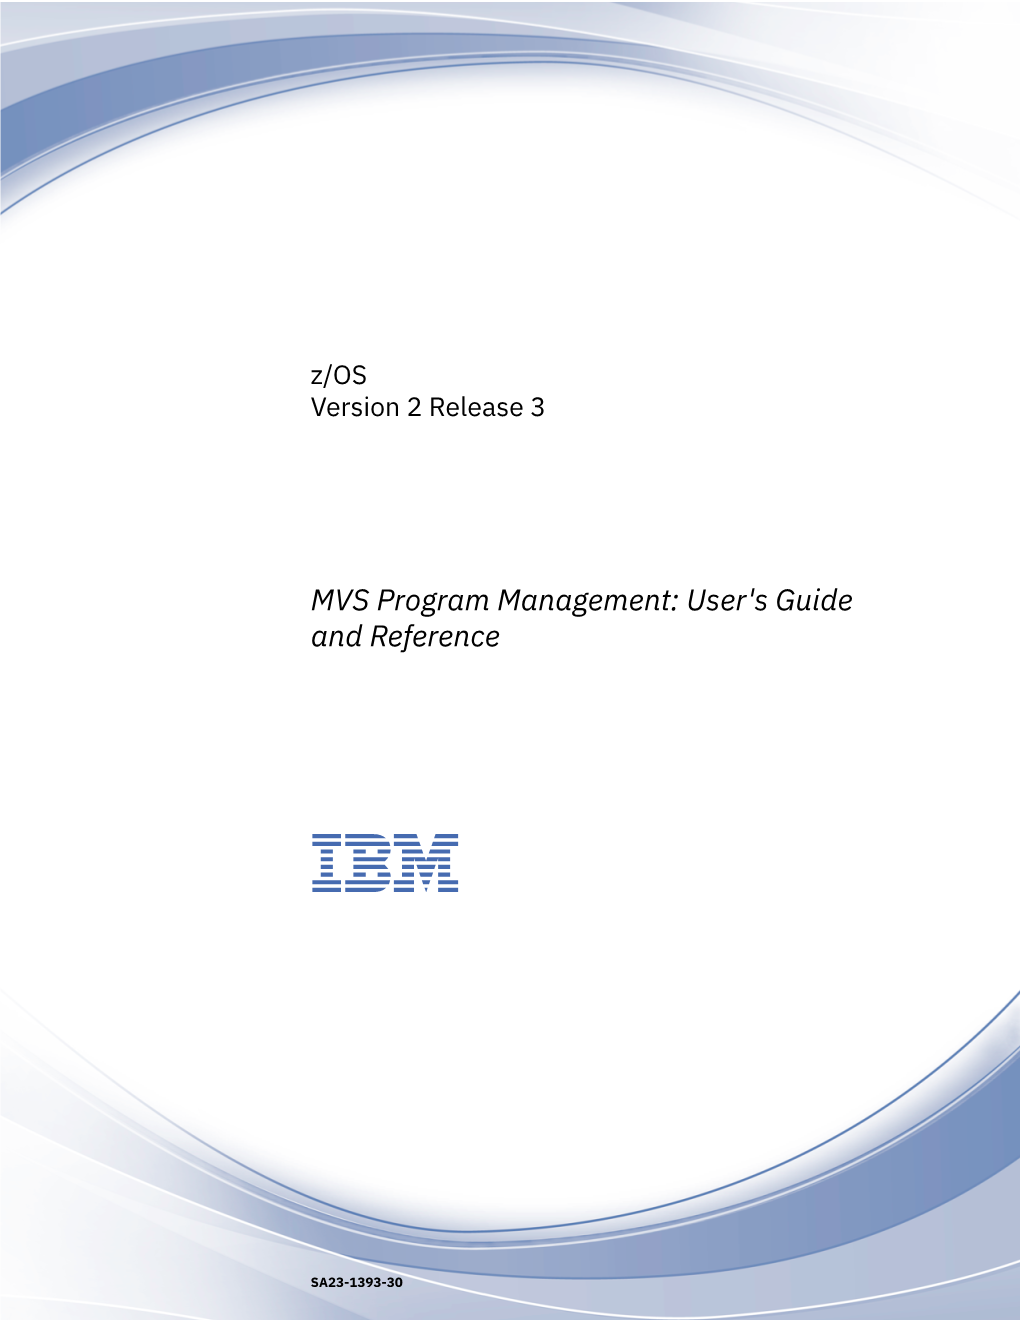 MVS Program Management: User's Guide and Reference